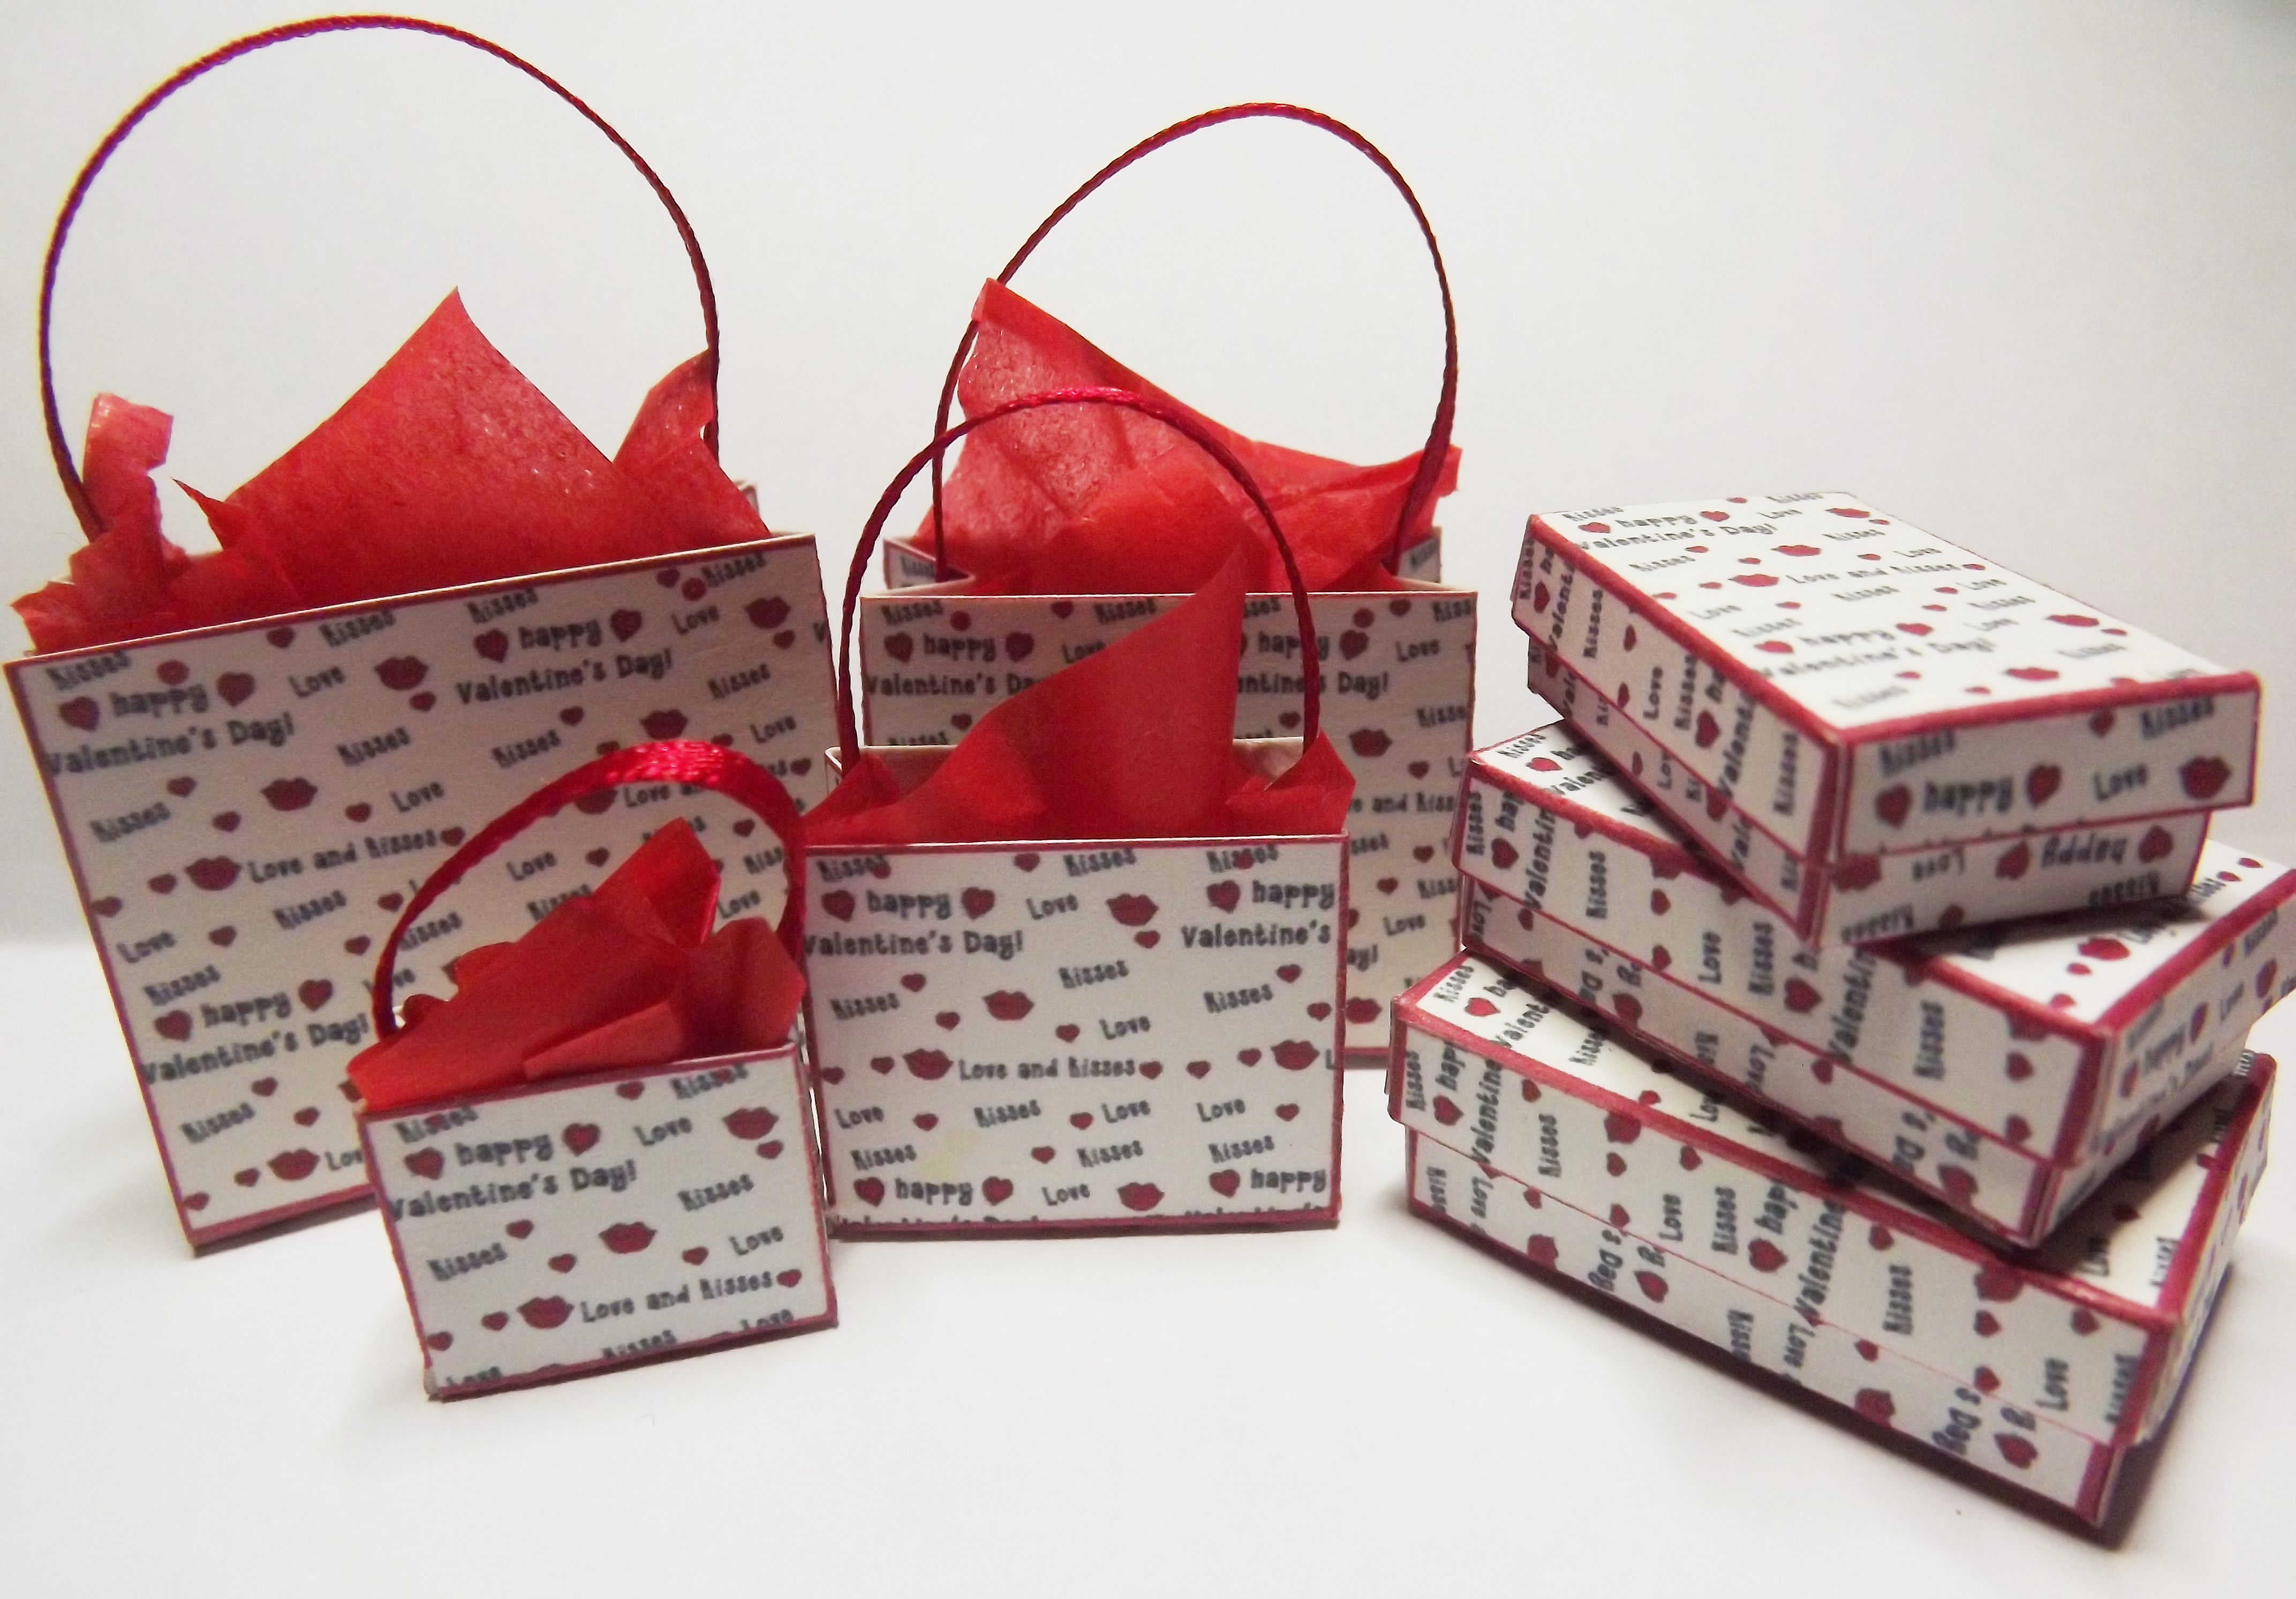 DOLLS HOUSE HEARTS & KISSES VALENTINES BAGS & BOXES KIT